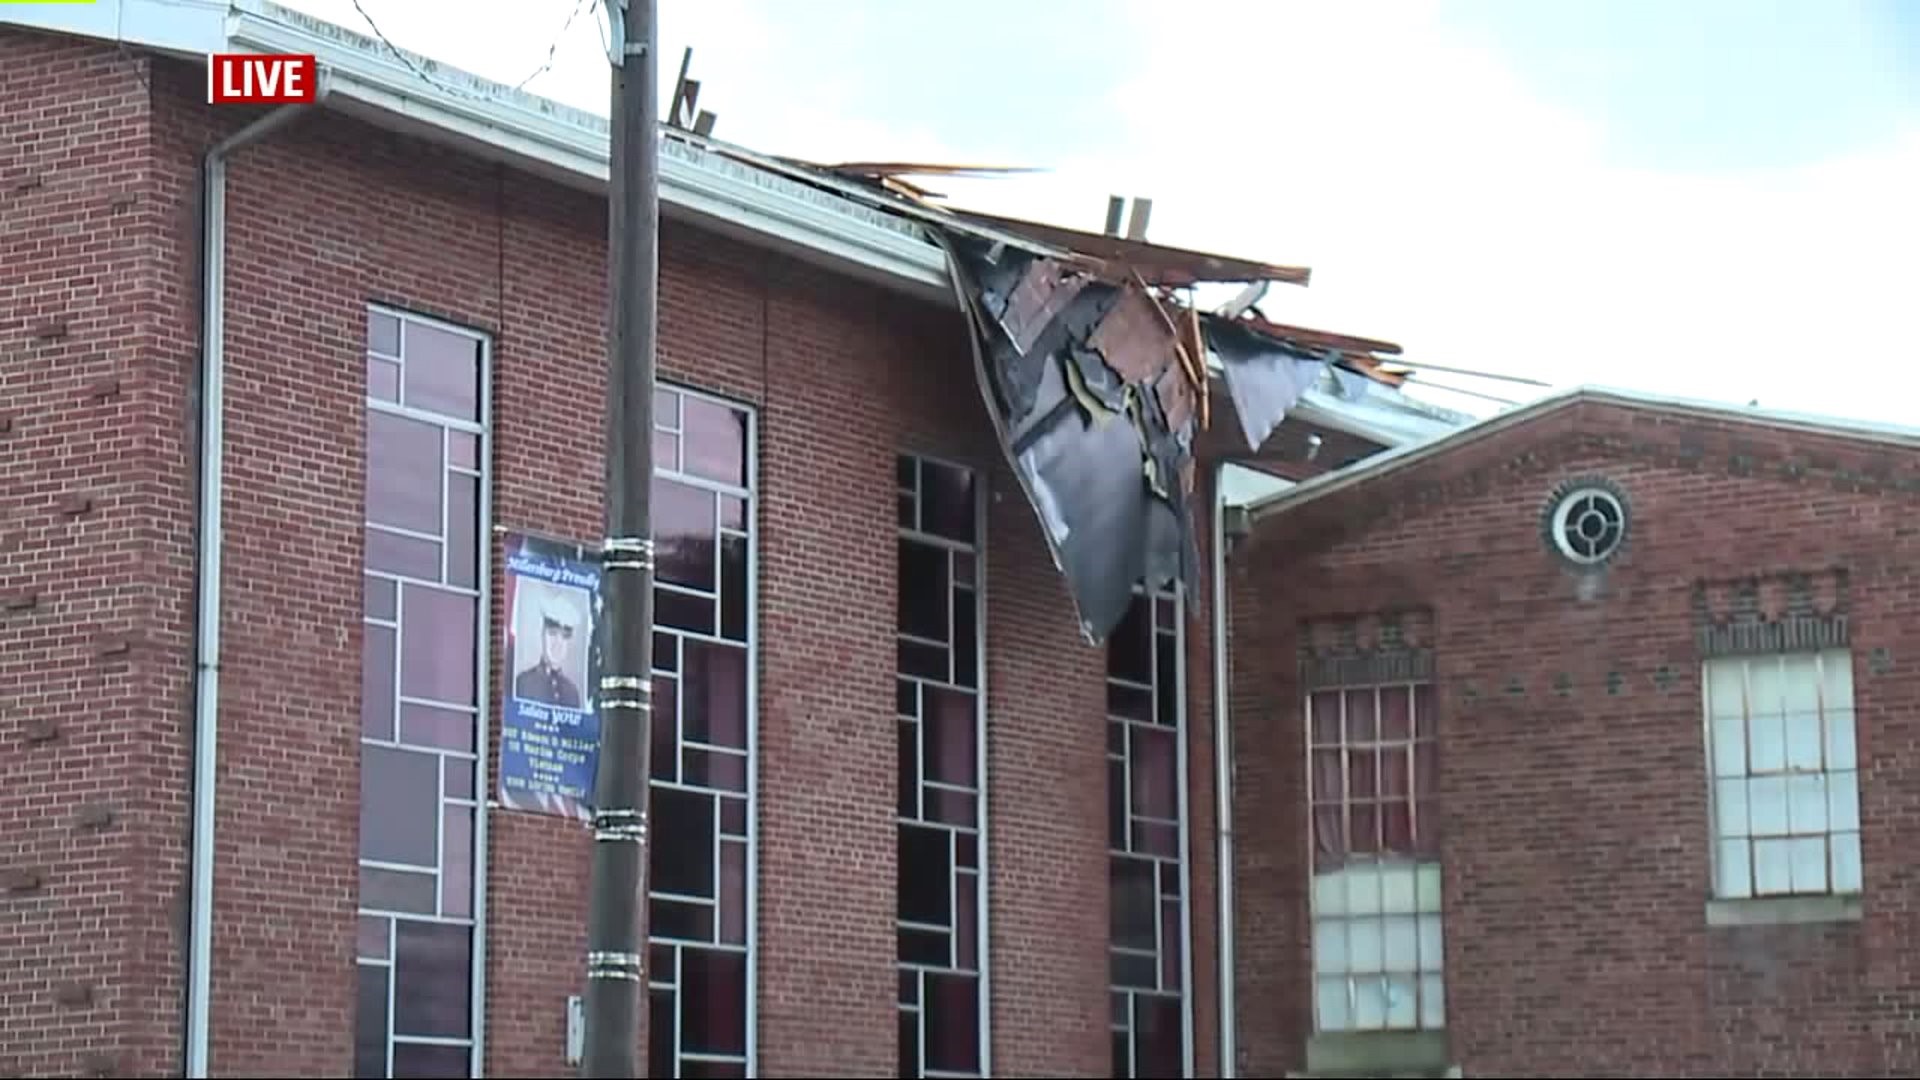 Strong winds rip off part of roof of Dauphin County church